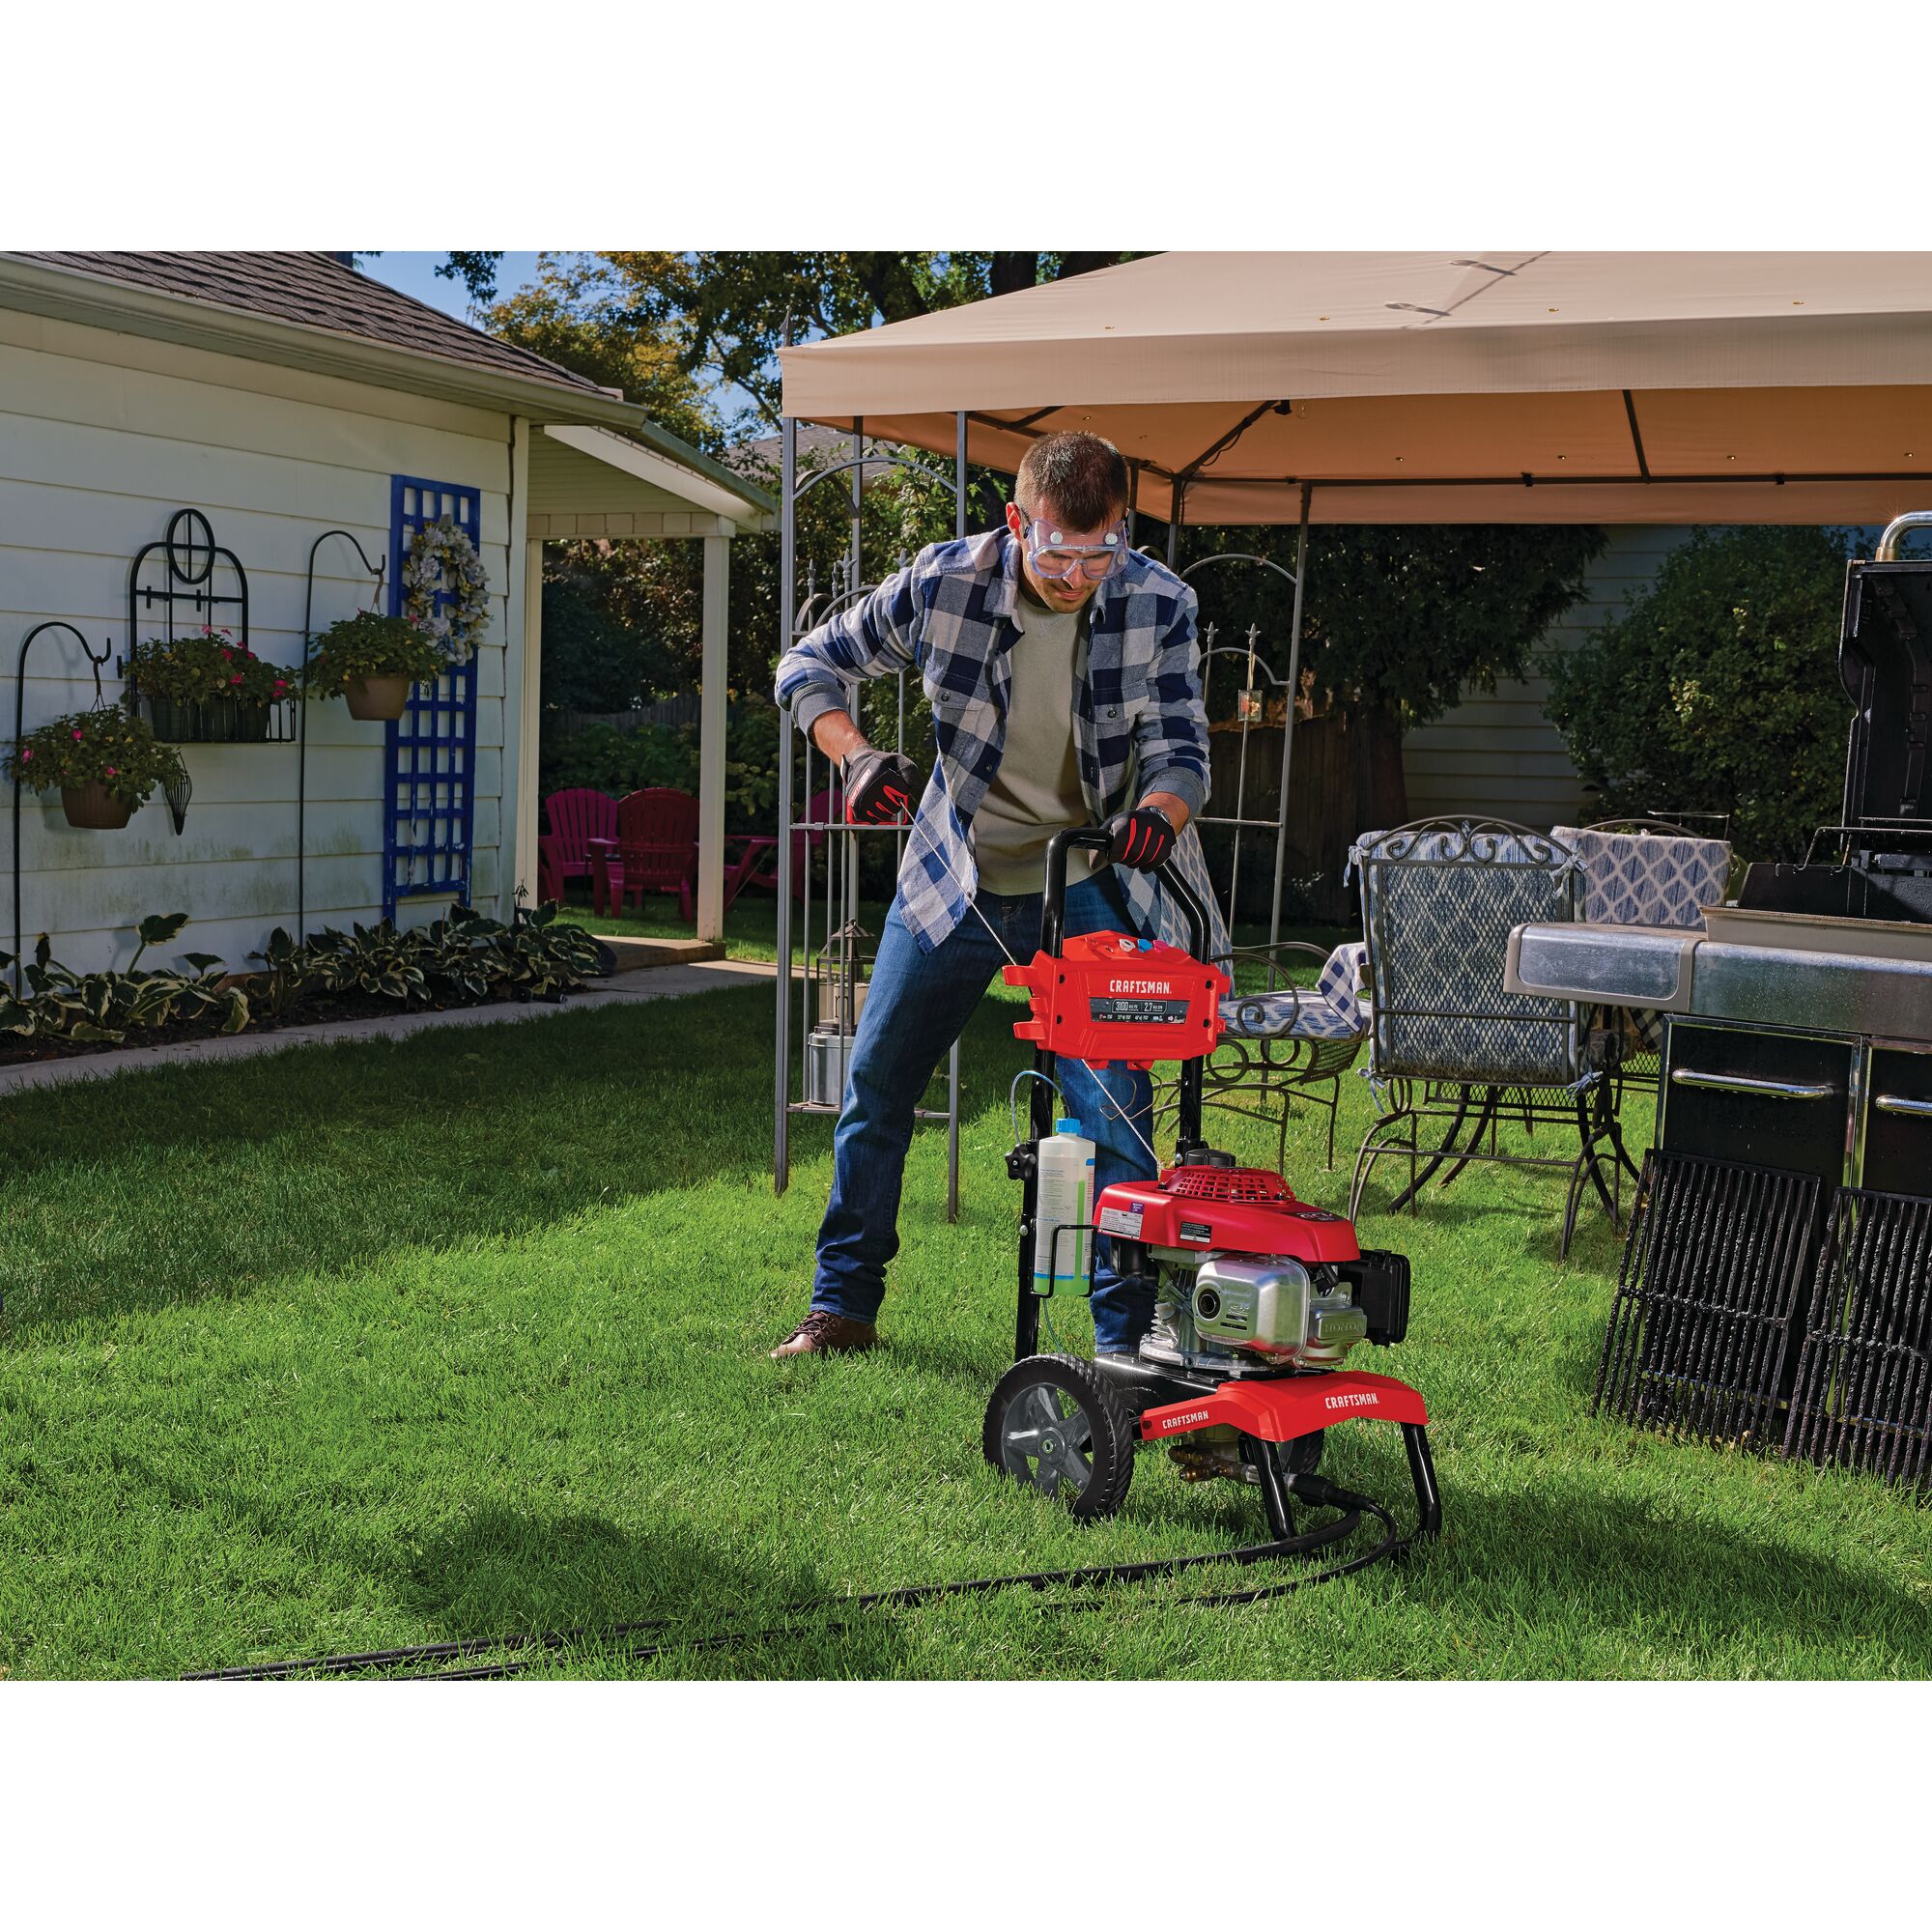 Person starting up 3100 MAX Pounds per Square Inch or 2 and seven tenths MAX Gallons Per Minute Pressure Washer to use in lawn outdoors.